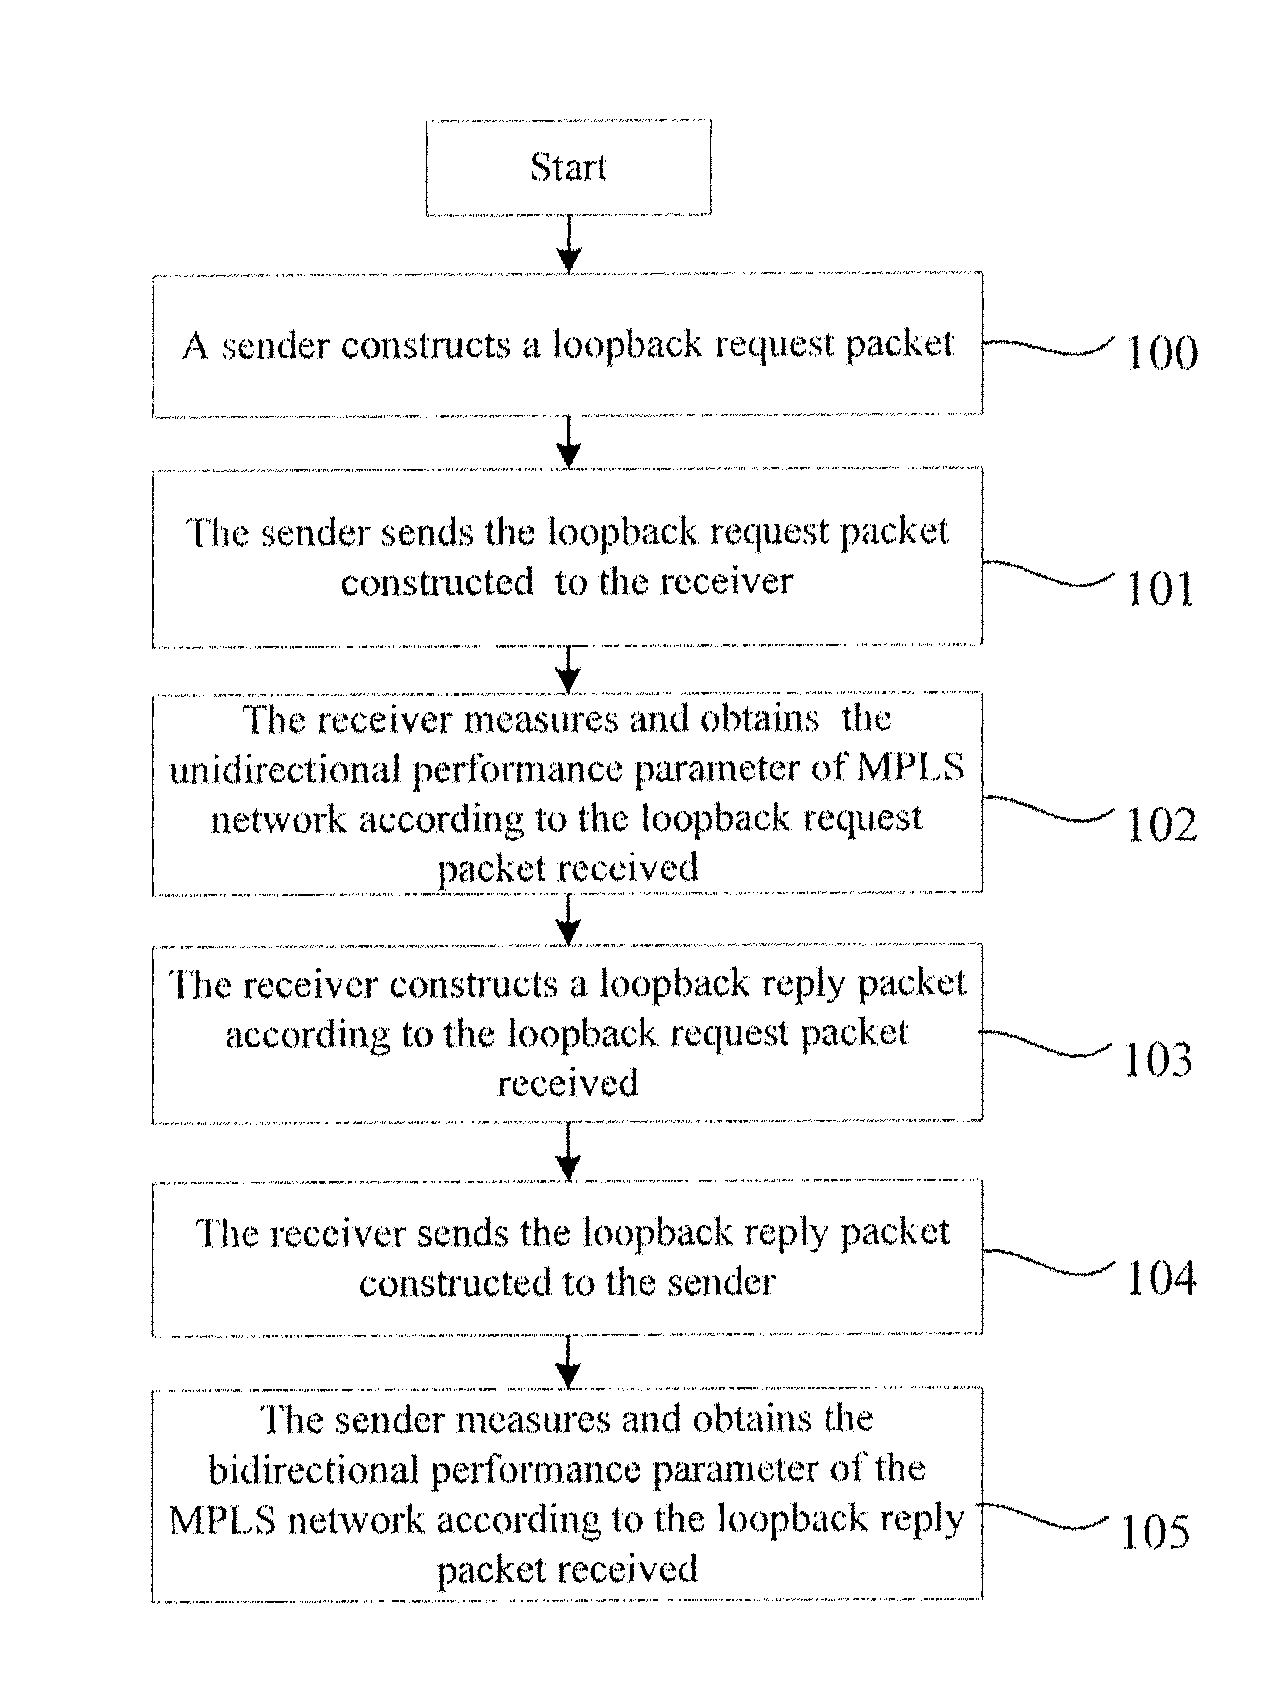 Method, System and Device for Measuring Performance Parameters of Multiprotocol Label Switching Network